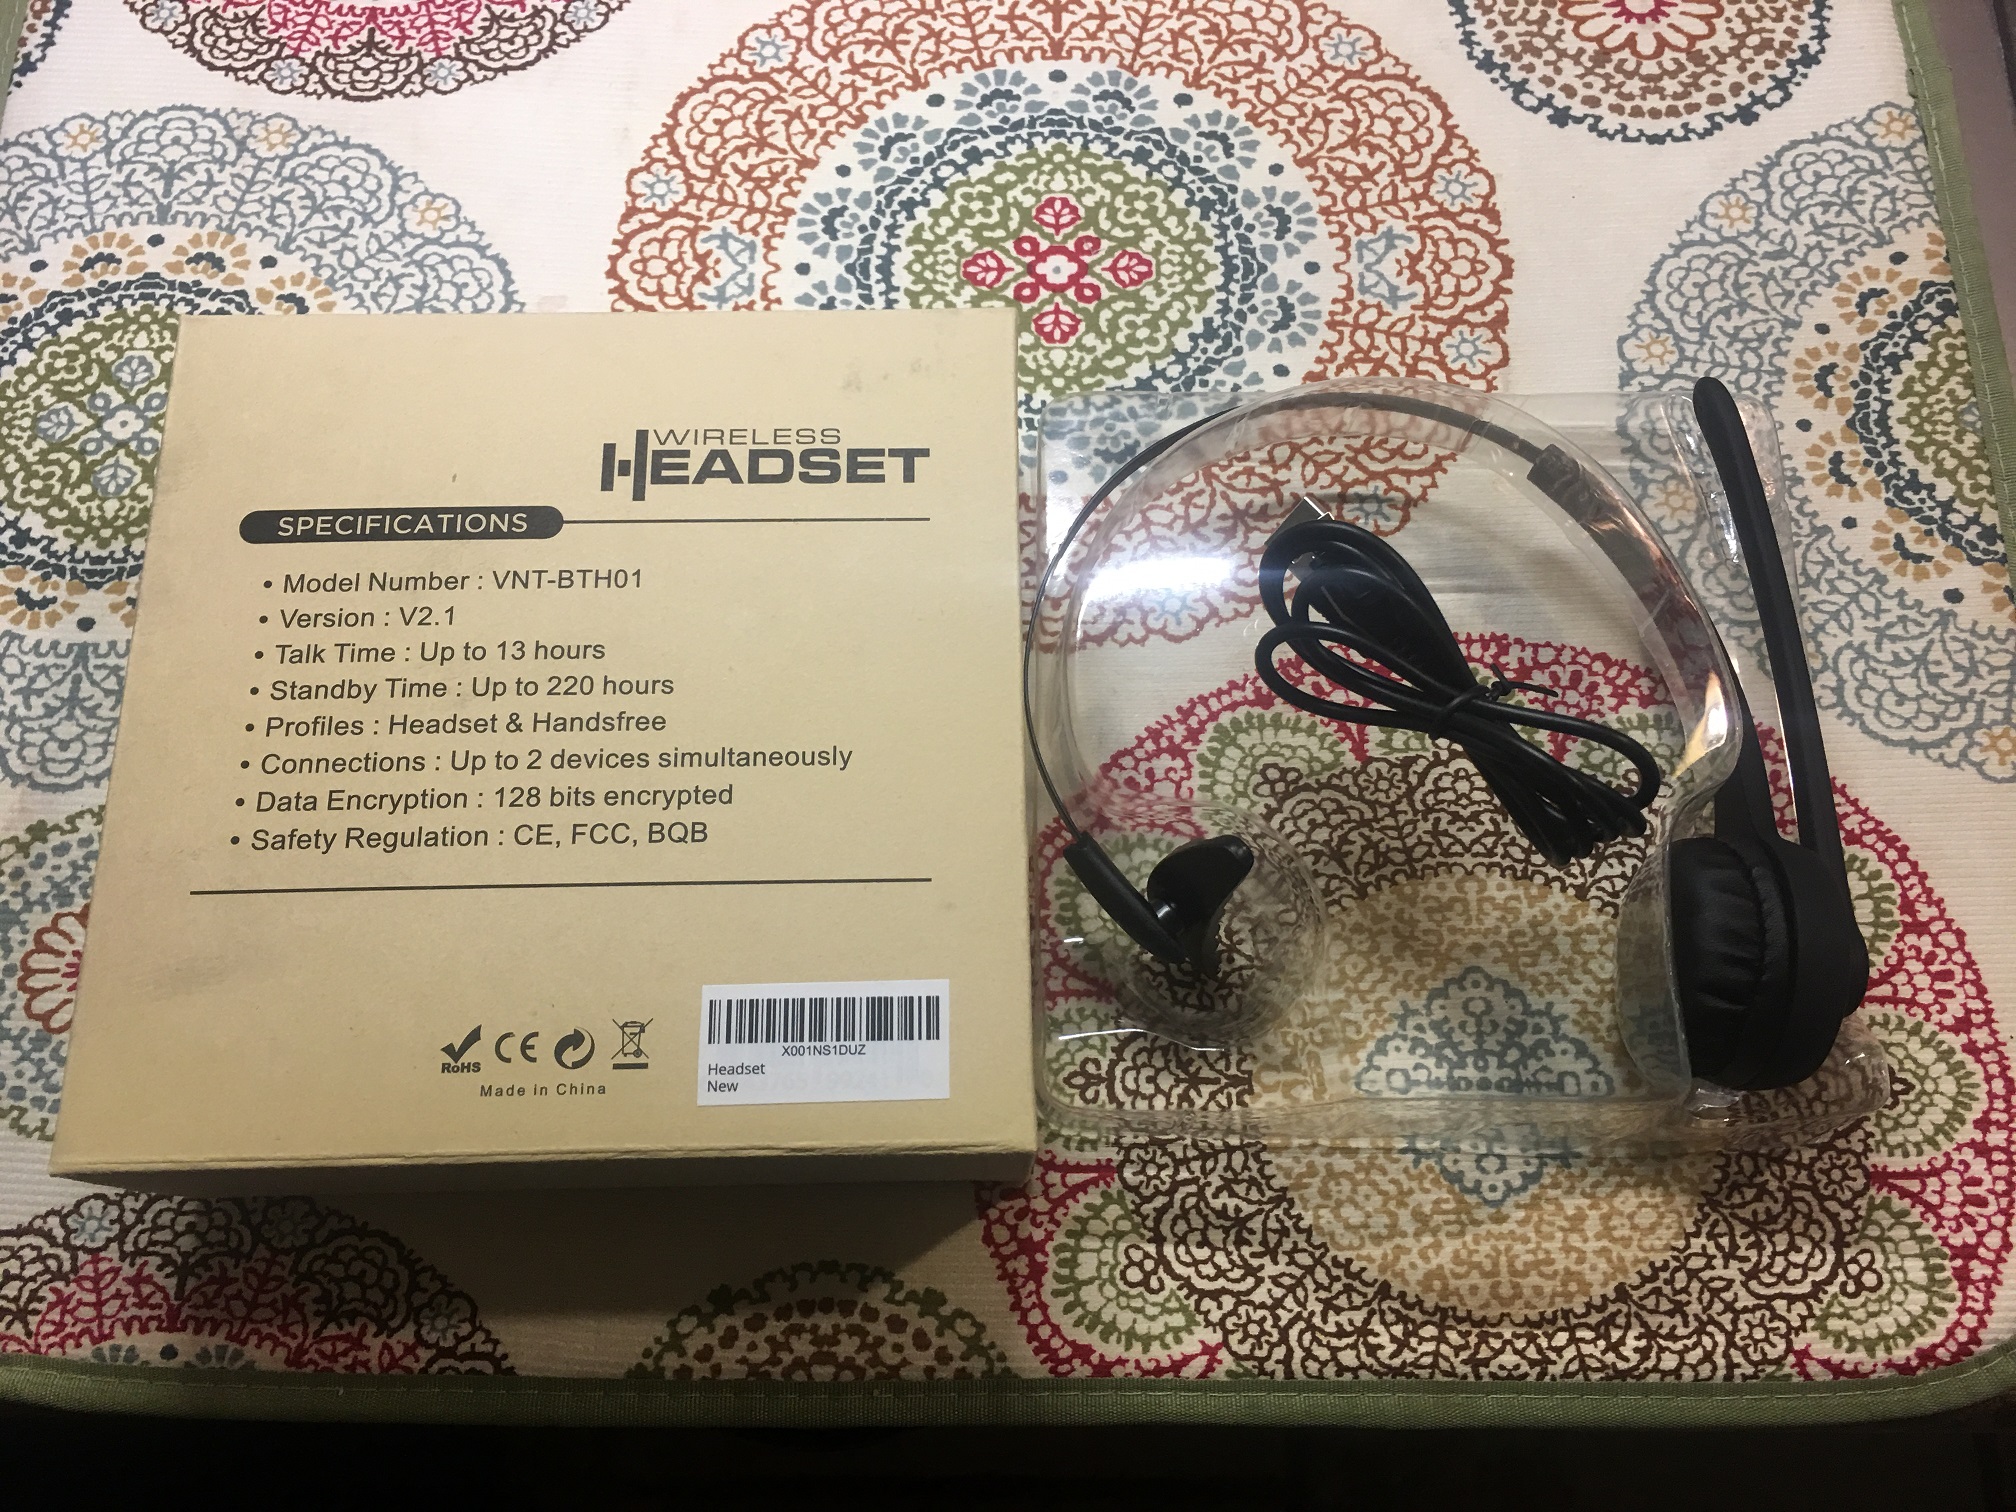 Great headset for truck drivers and gamers